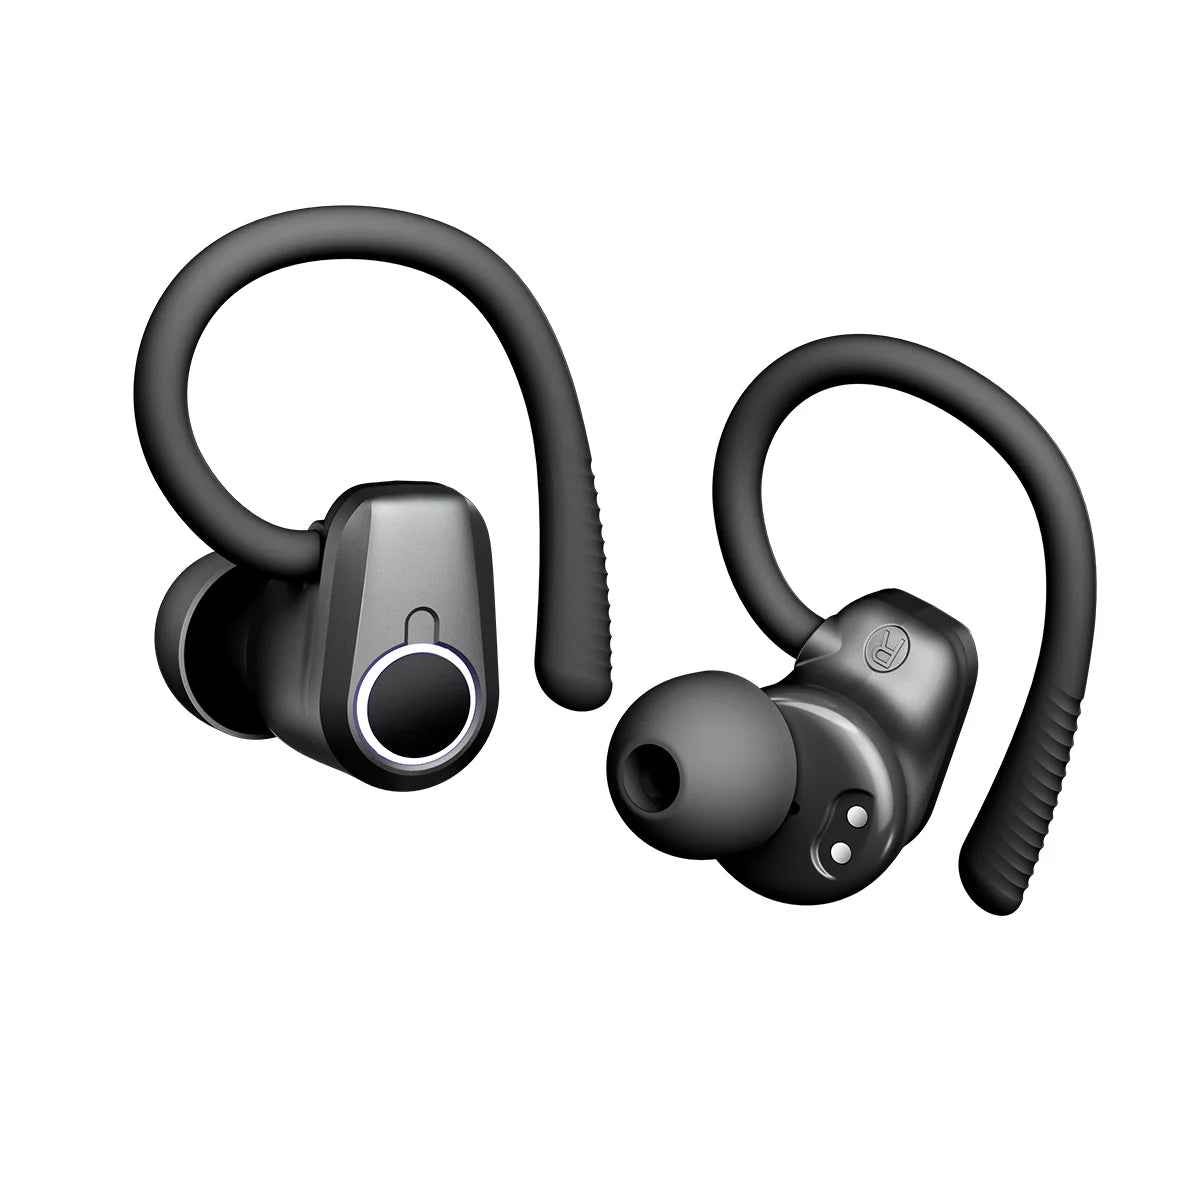 Blackview AirBuds 60 - Blackview